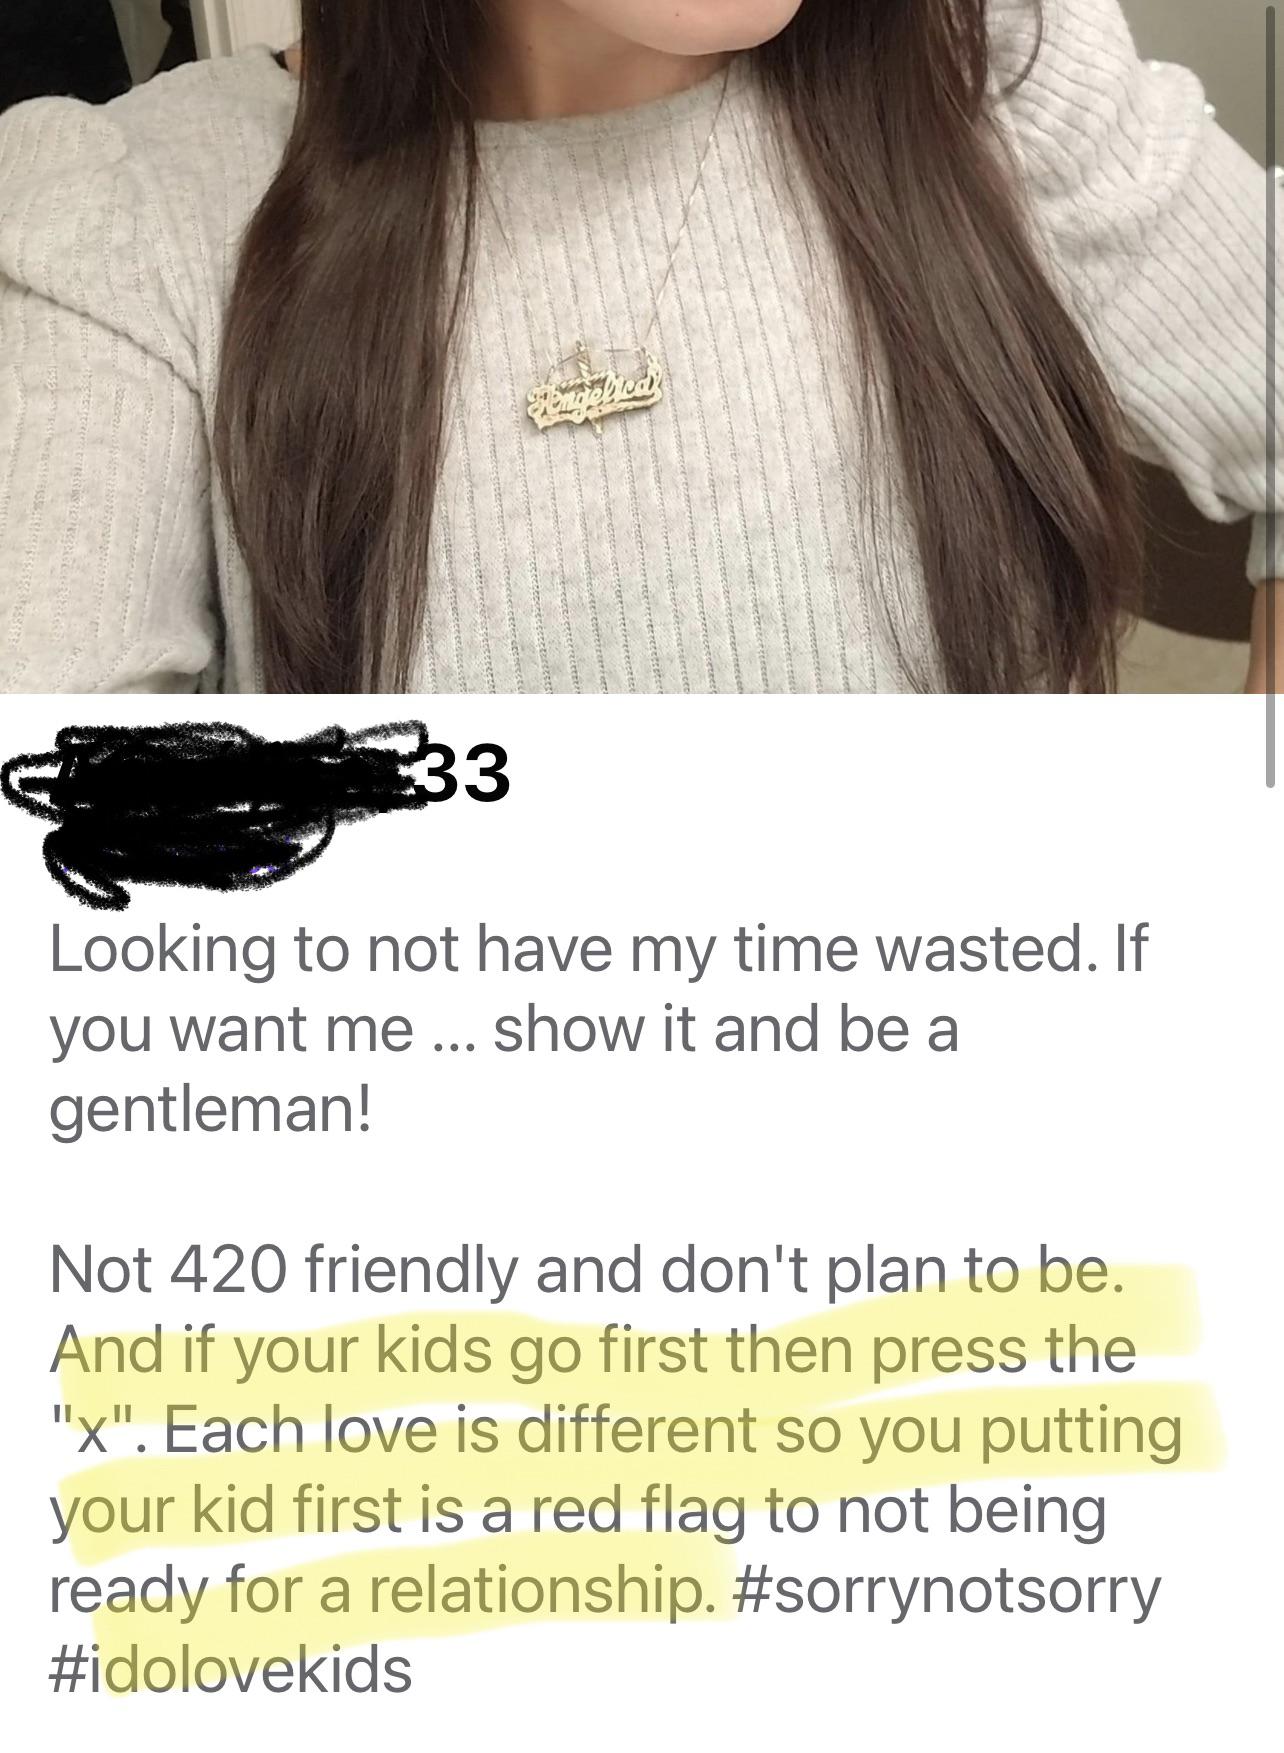 entitled people getting owned - long hair - 33 Hengebied Looking to not have my time wasted. If you want me ... show it and be a gentleman! Not 420 friendly and don't plan to be. And if your kids go first then press the "x". Each love is different so you 